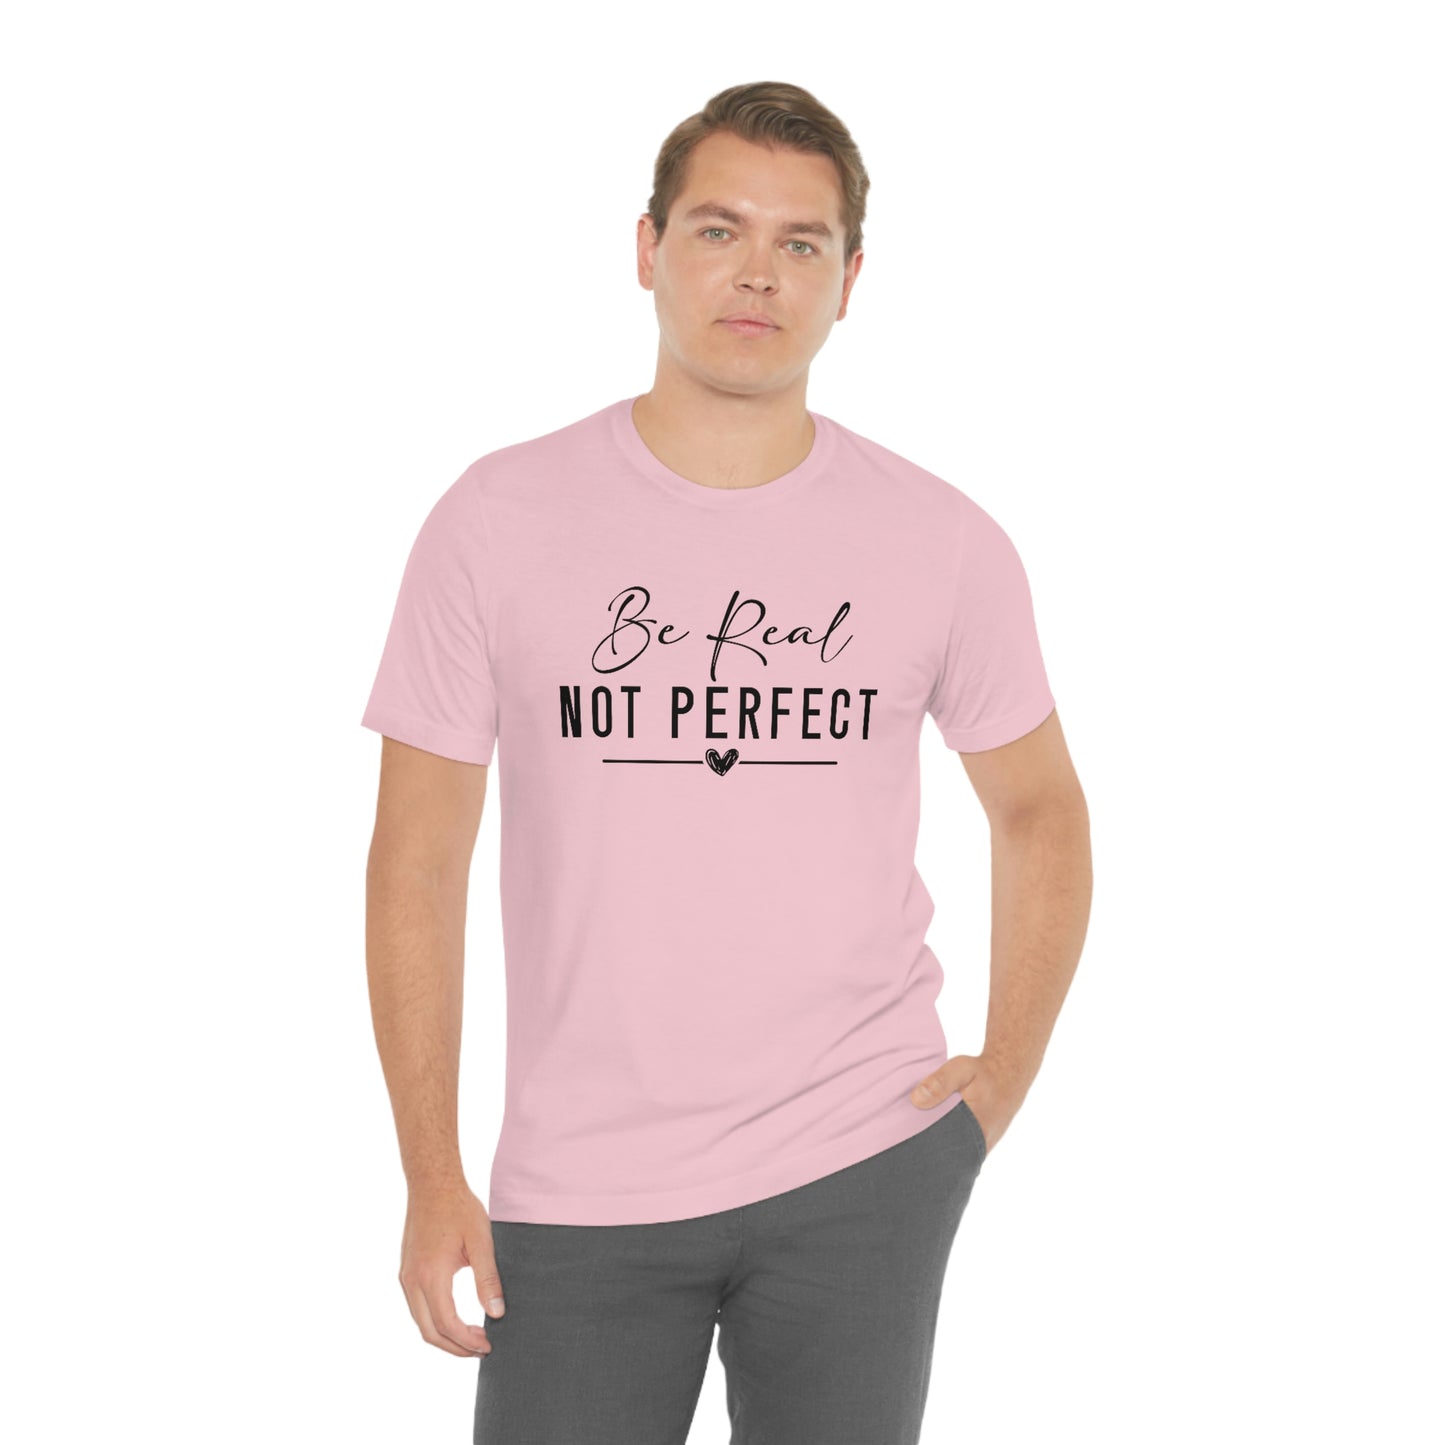 Inspirational Apparel (Be Real Not Perfect Tee)